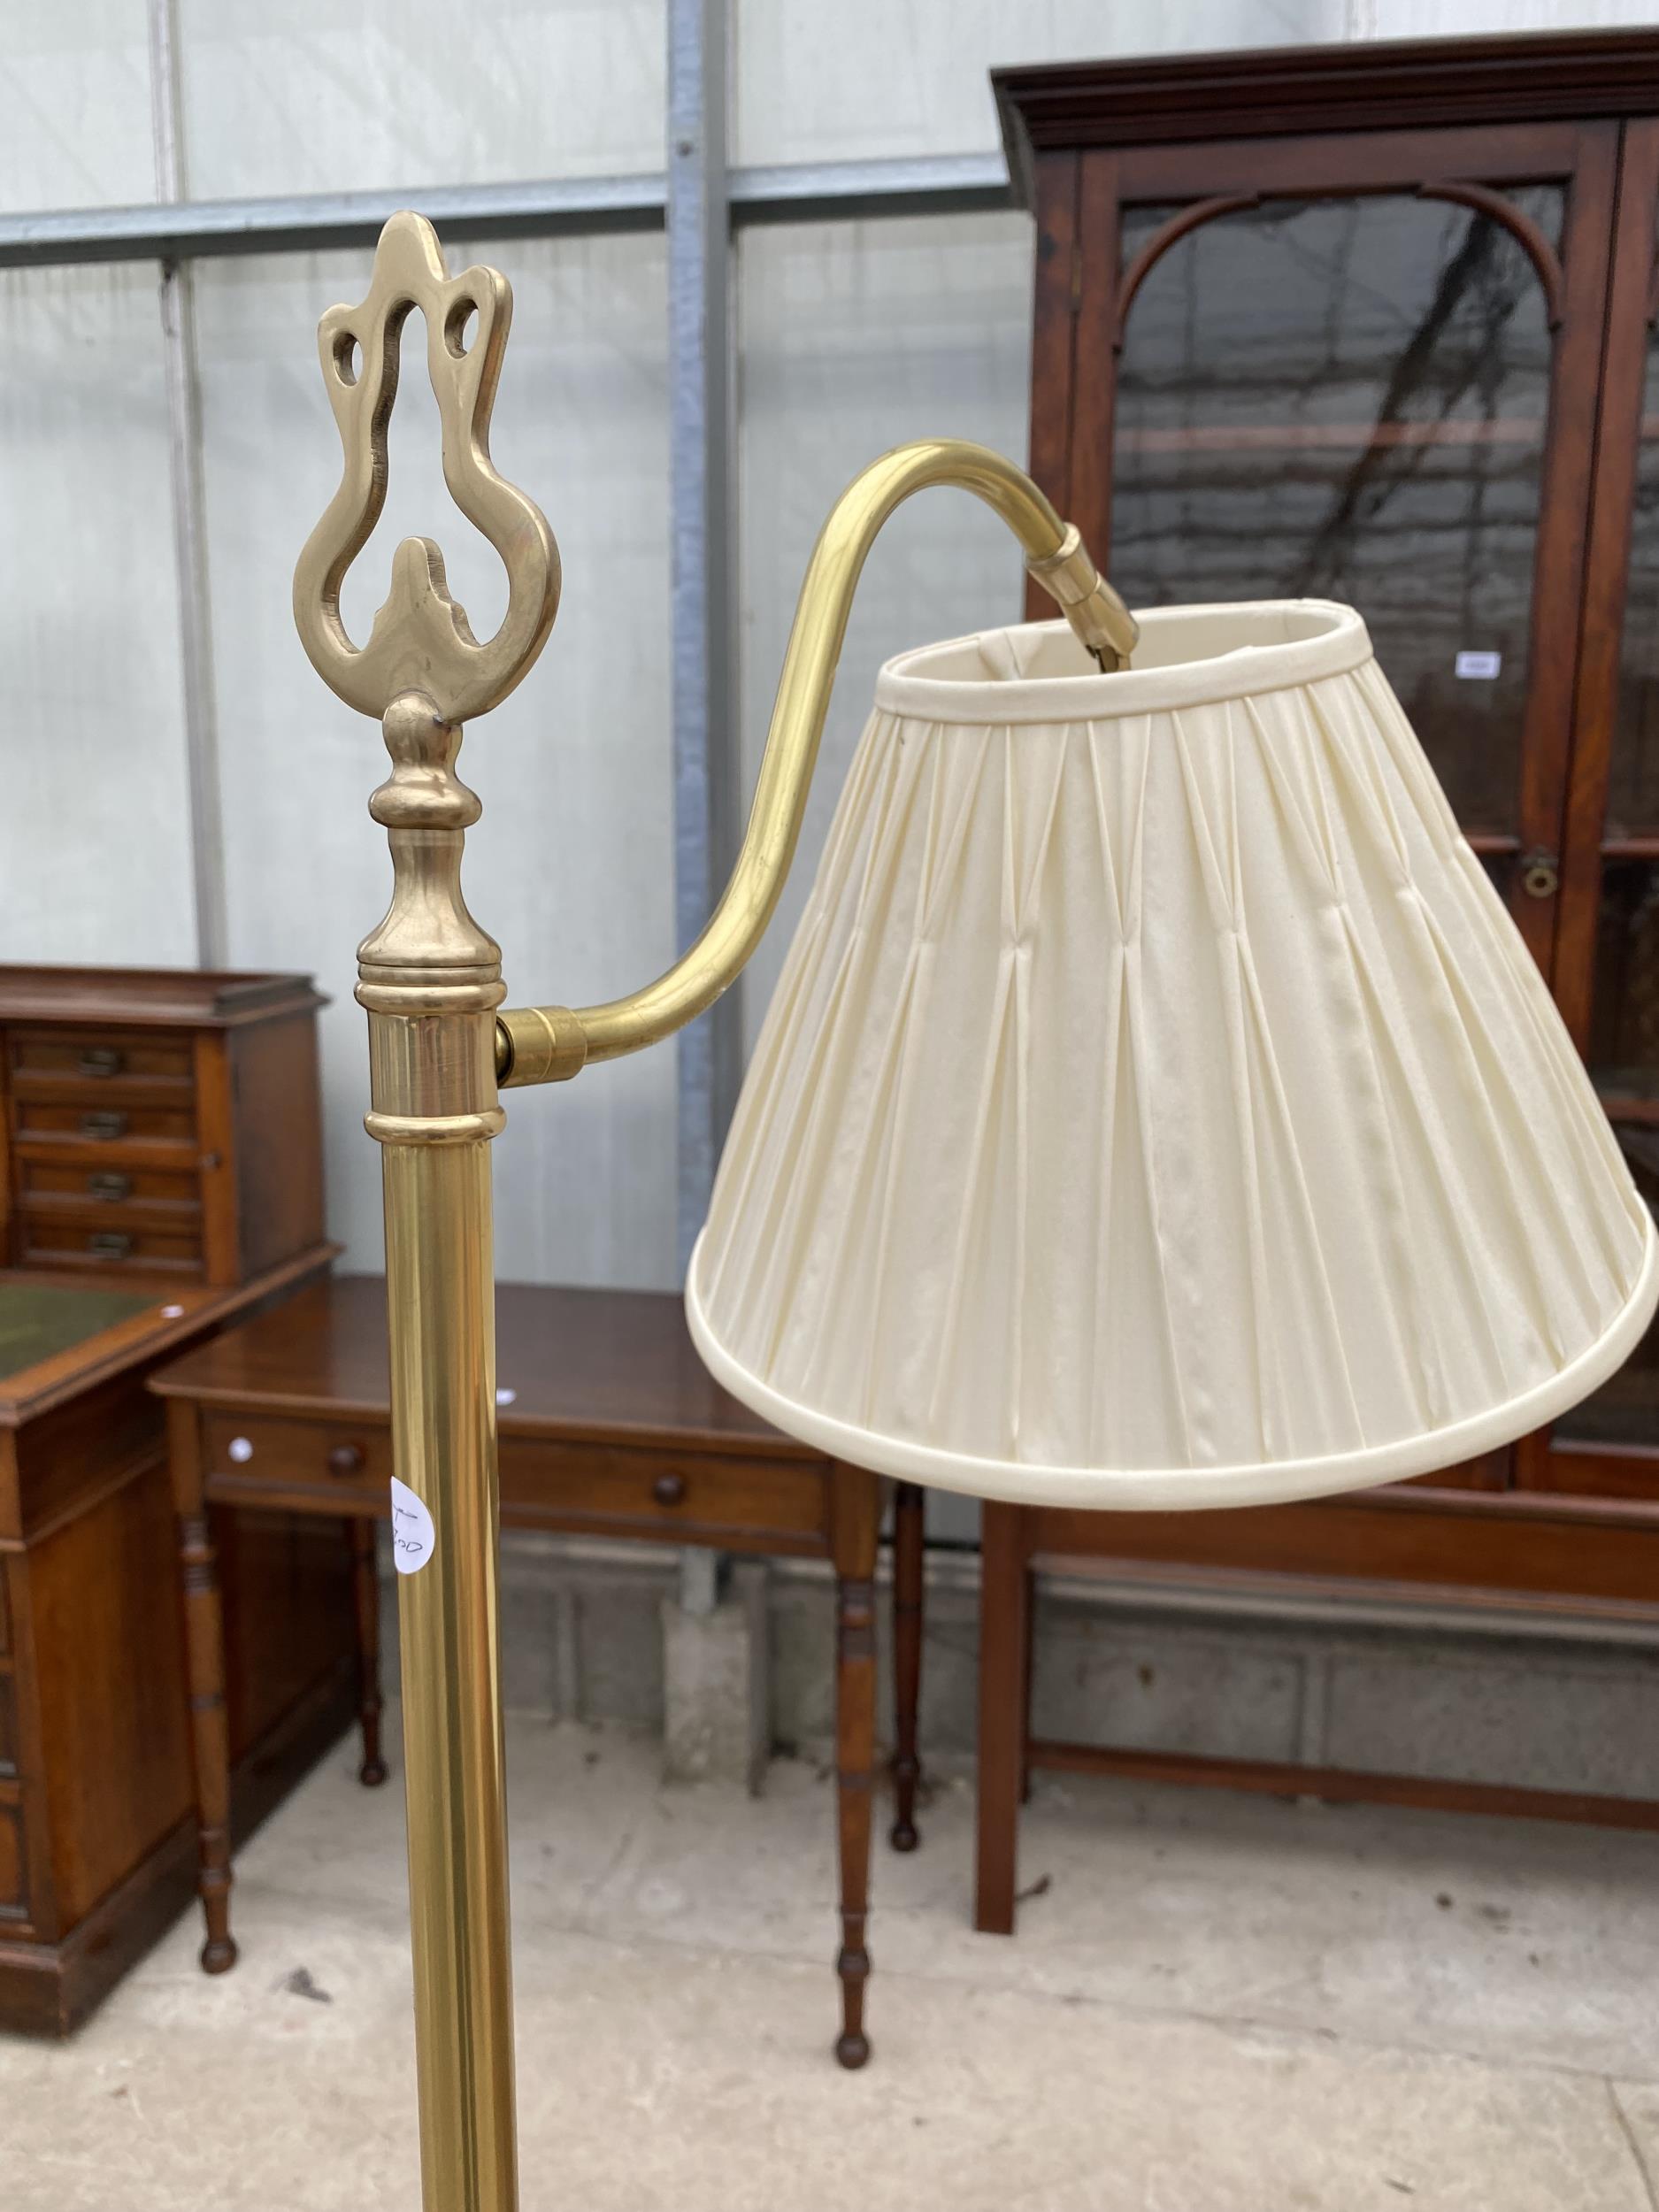 A BRASS READING STANDARD LAMP - Image 3 of 4